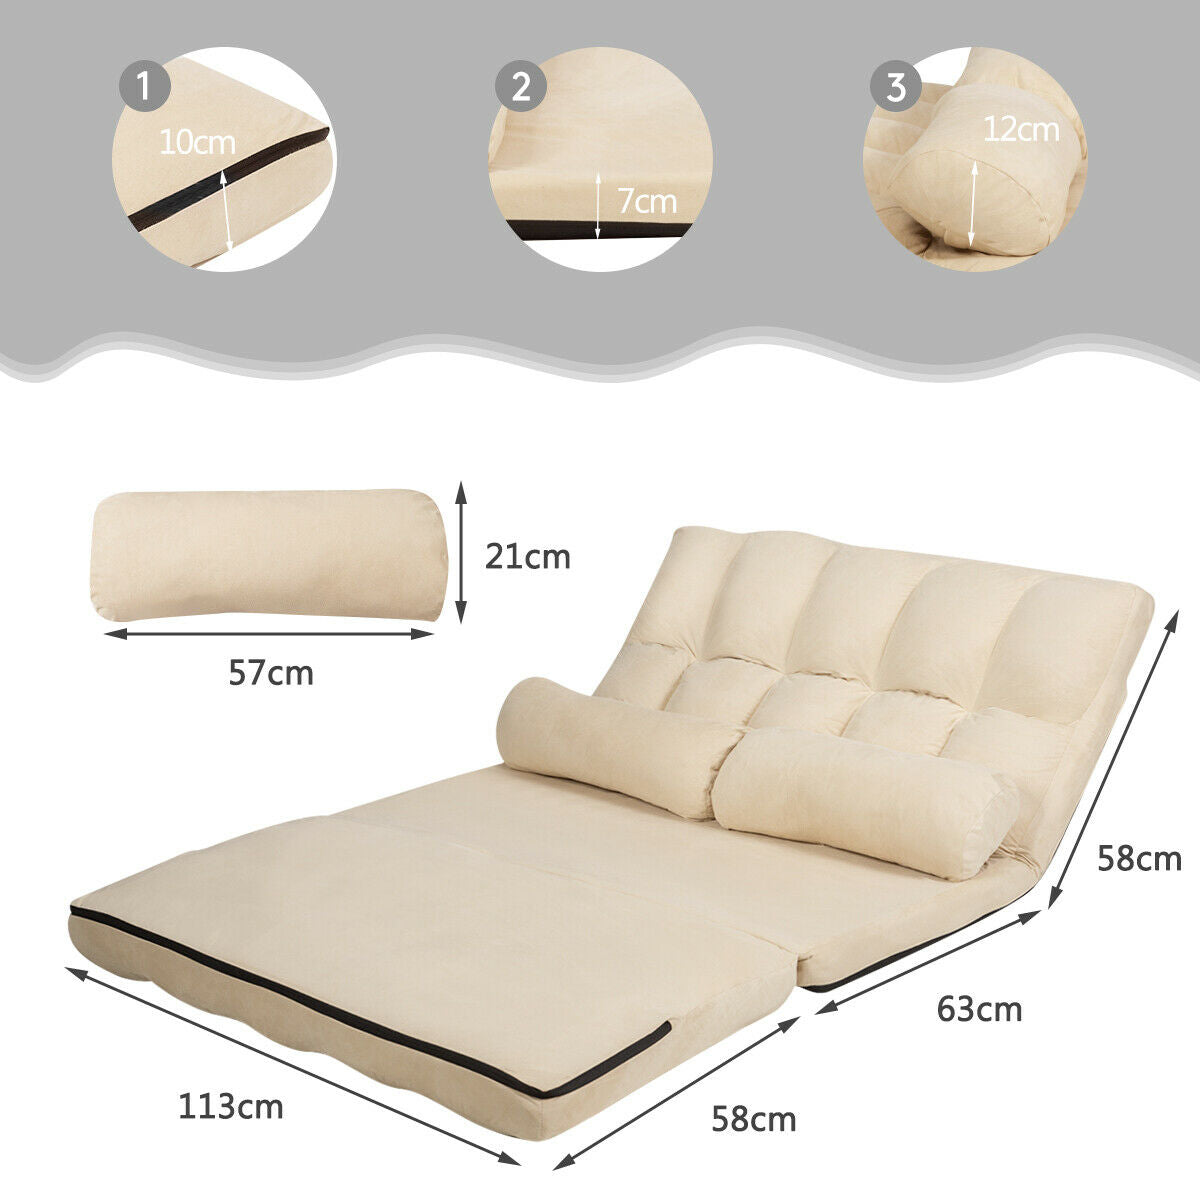 2 in 1 Folding Floor Lazy Sofa Bed with 6 Adjustable Seat Positions and 2 Pillows Beige